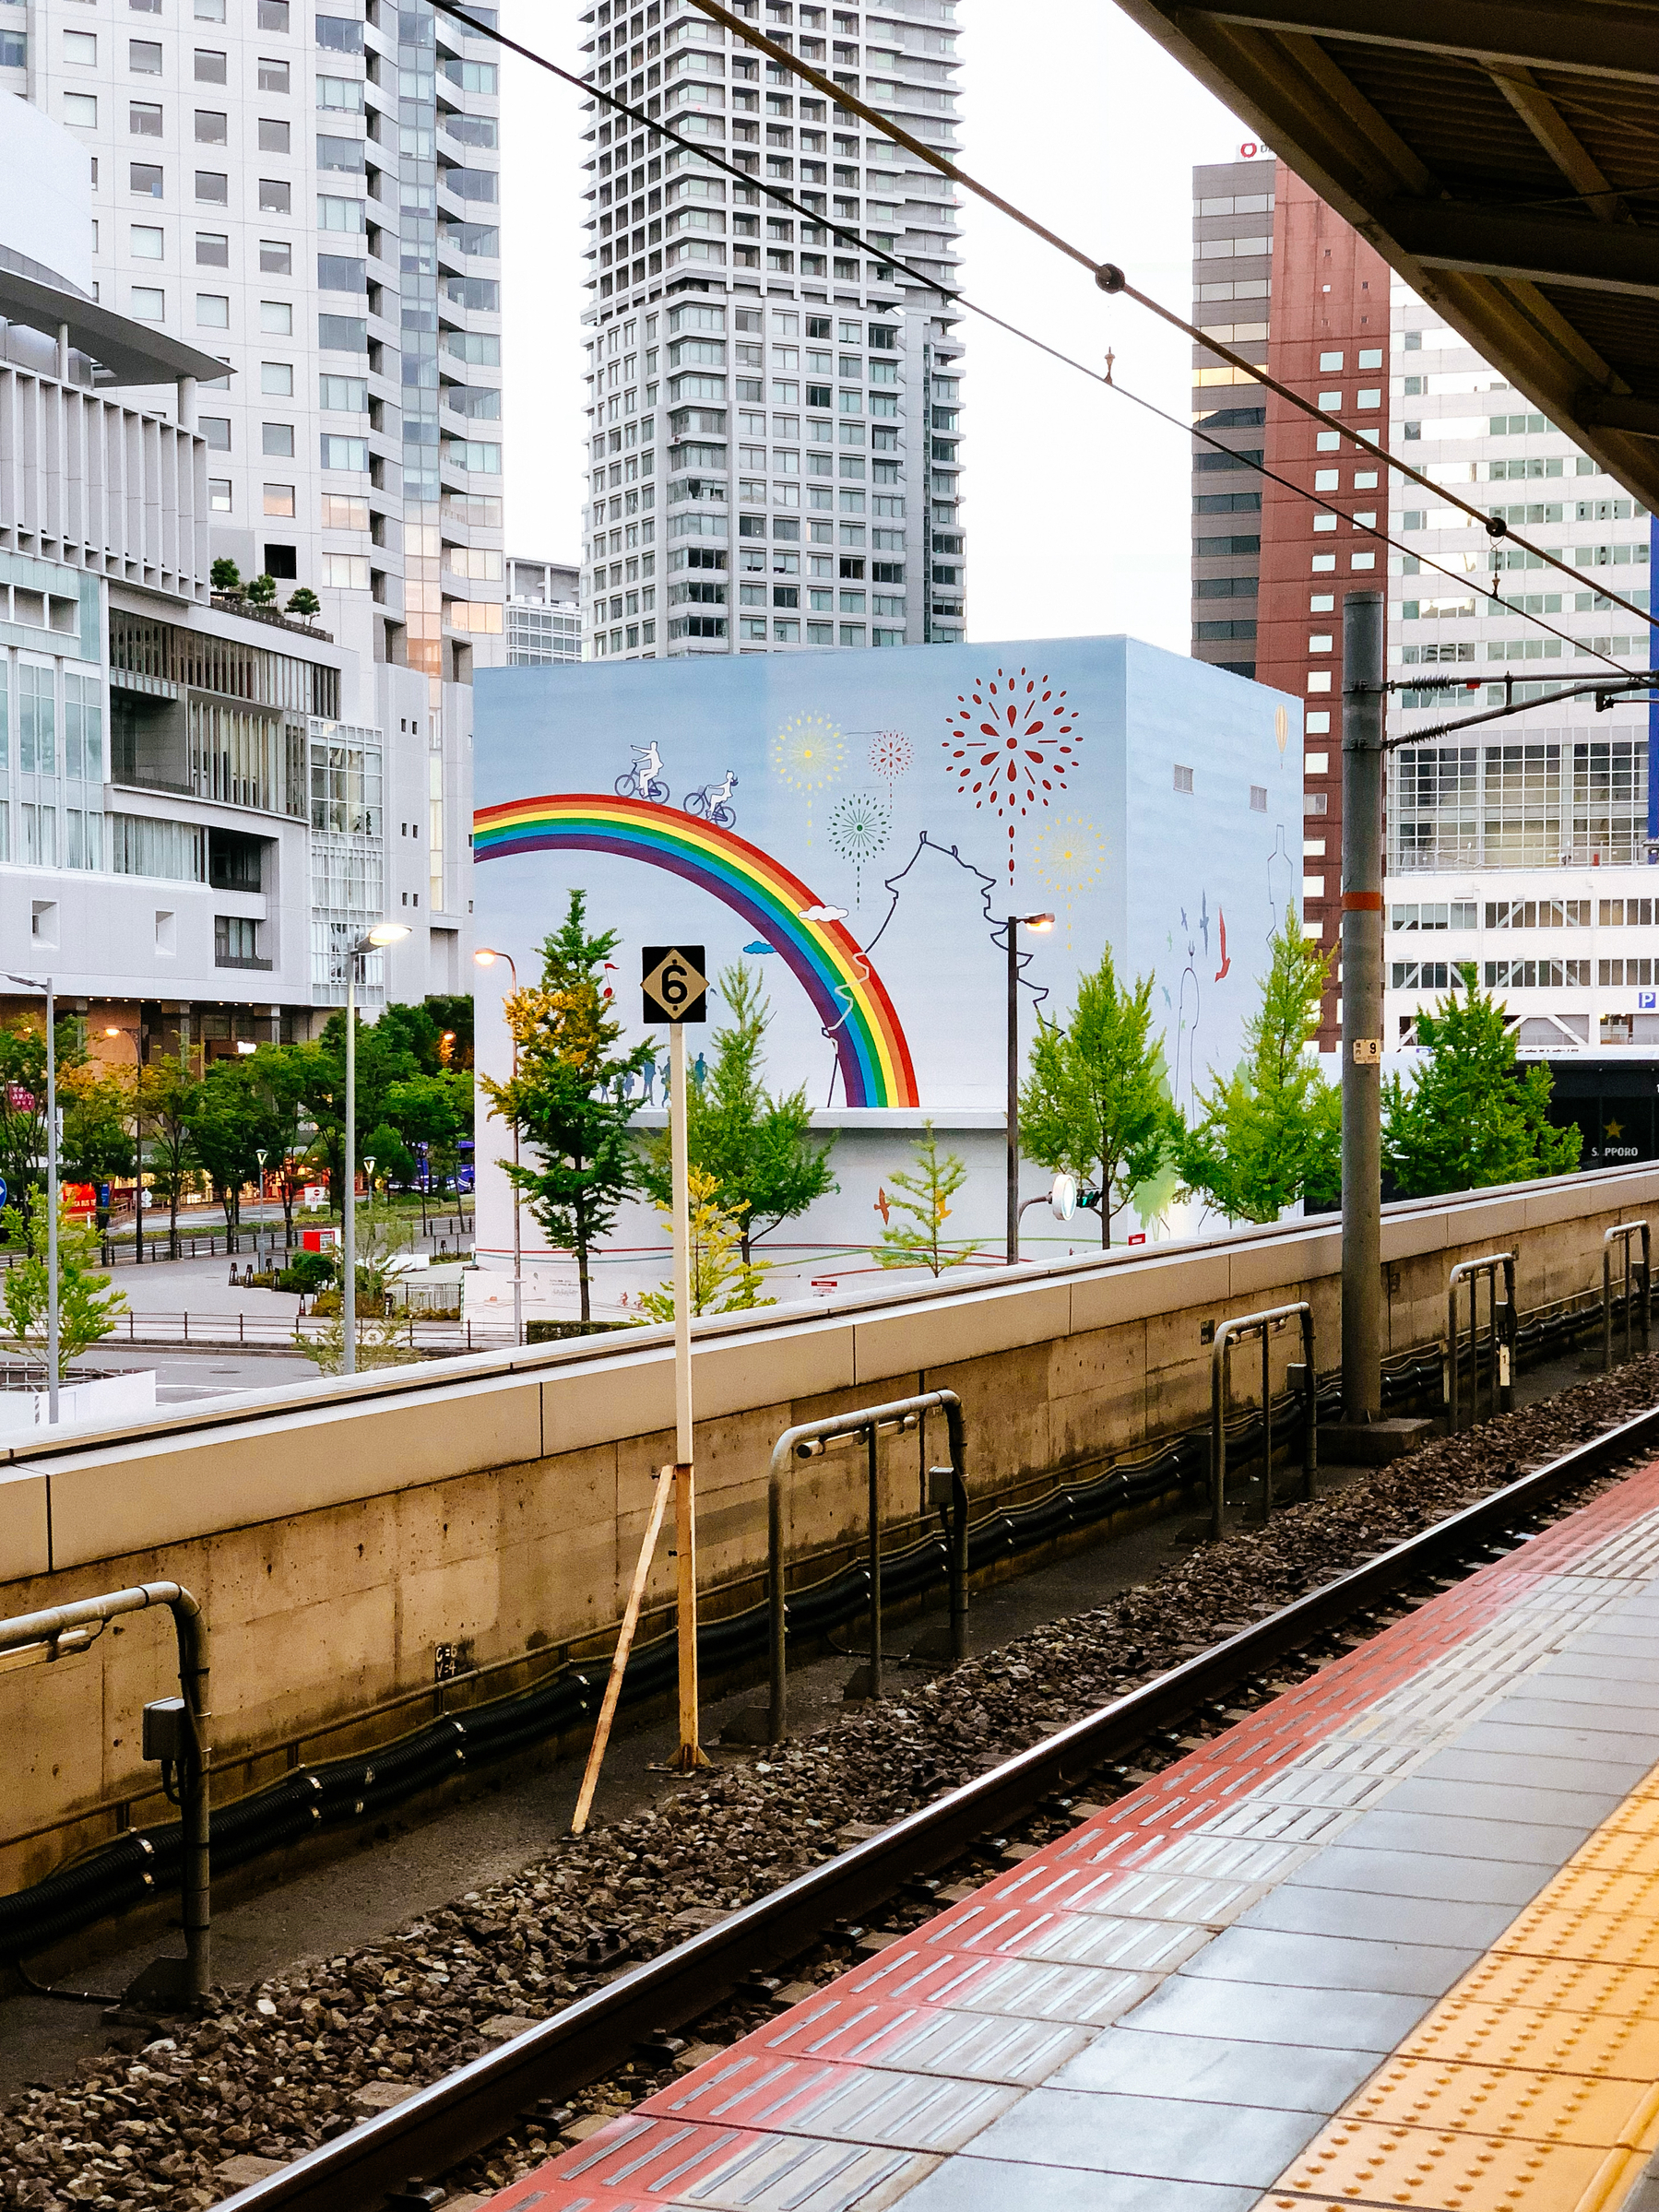 A rainbow painted in a wall, seen from a train station. 